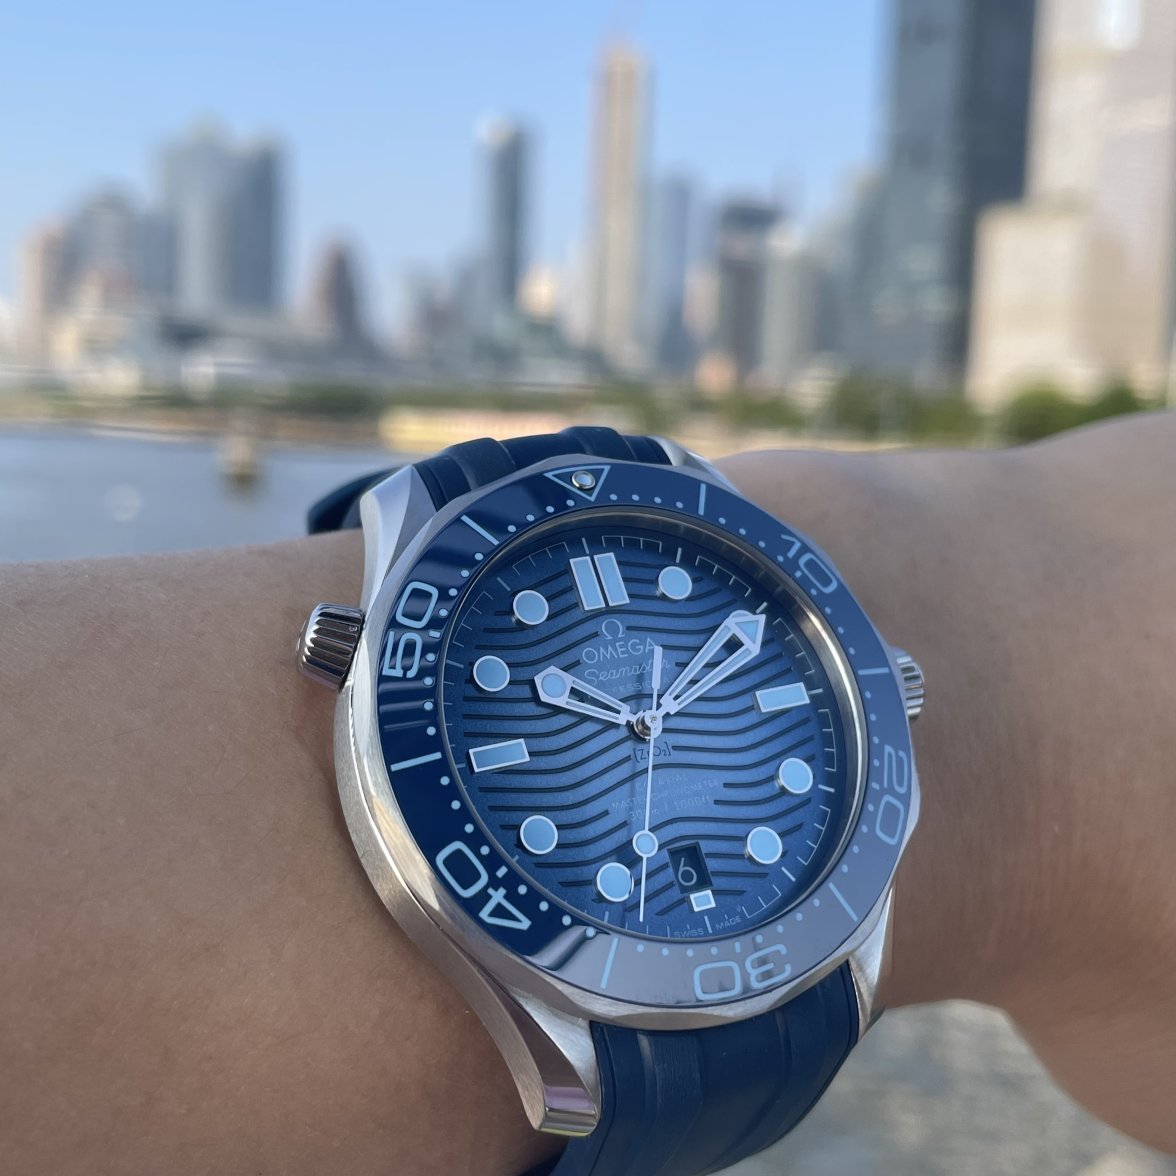 The Summer Blue Seamaster 300M Diver is easily in my Top 5 best